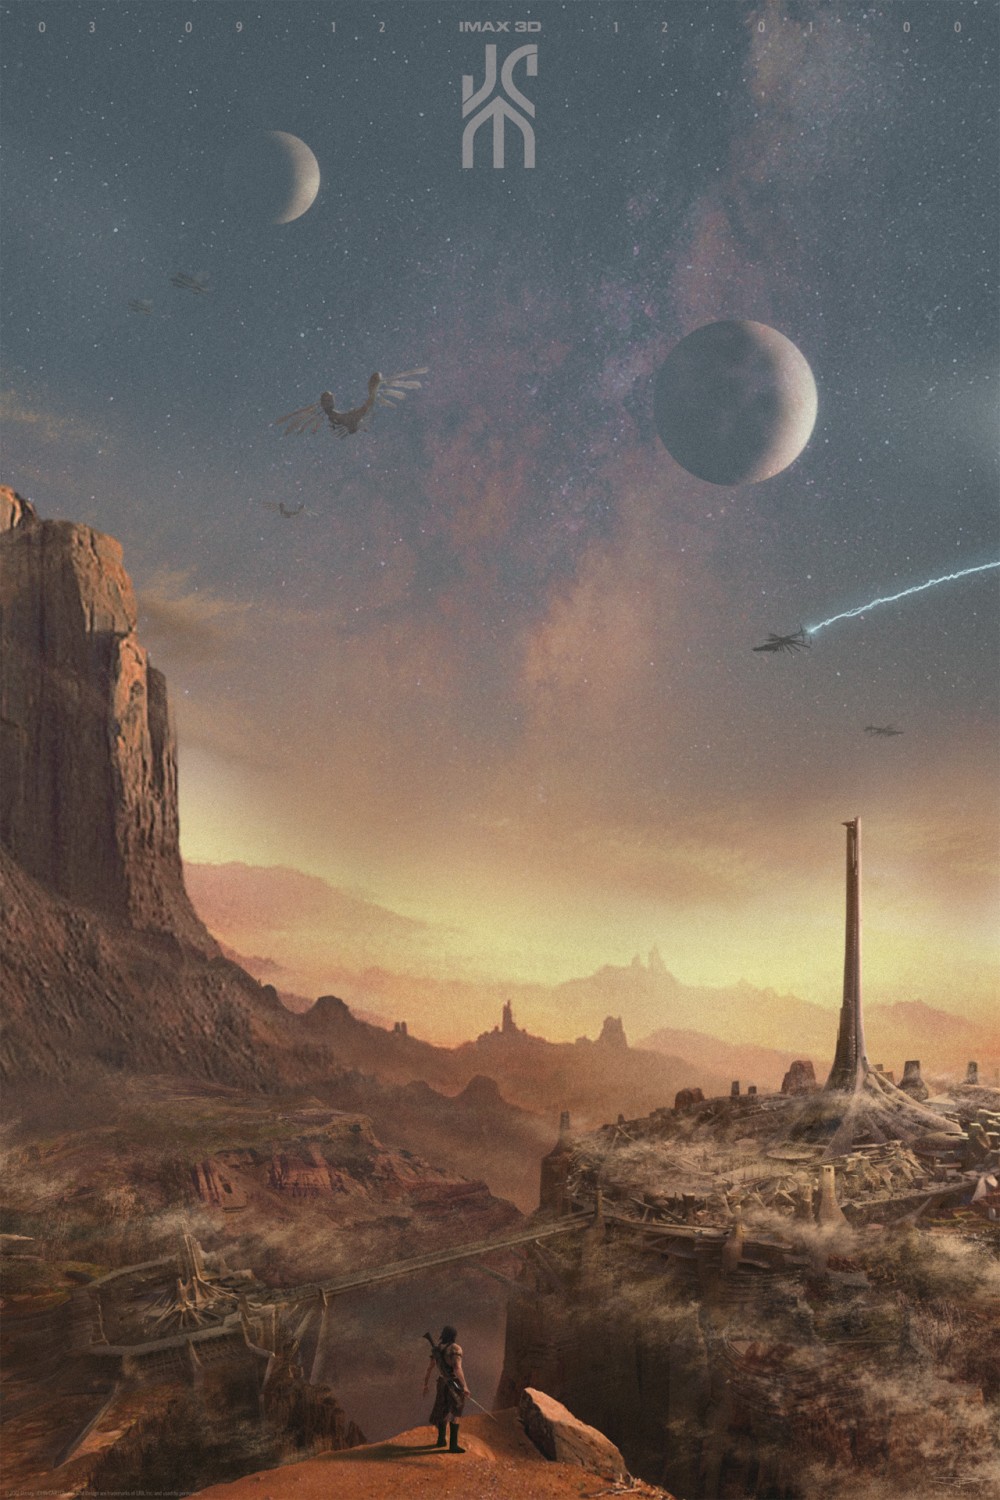 Extra Large Movie Poster Image for John Carter (#12 of 12)